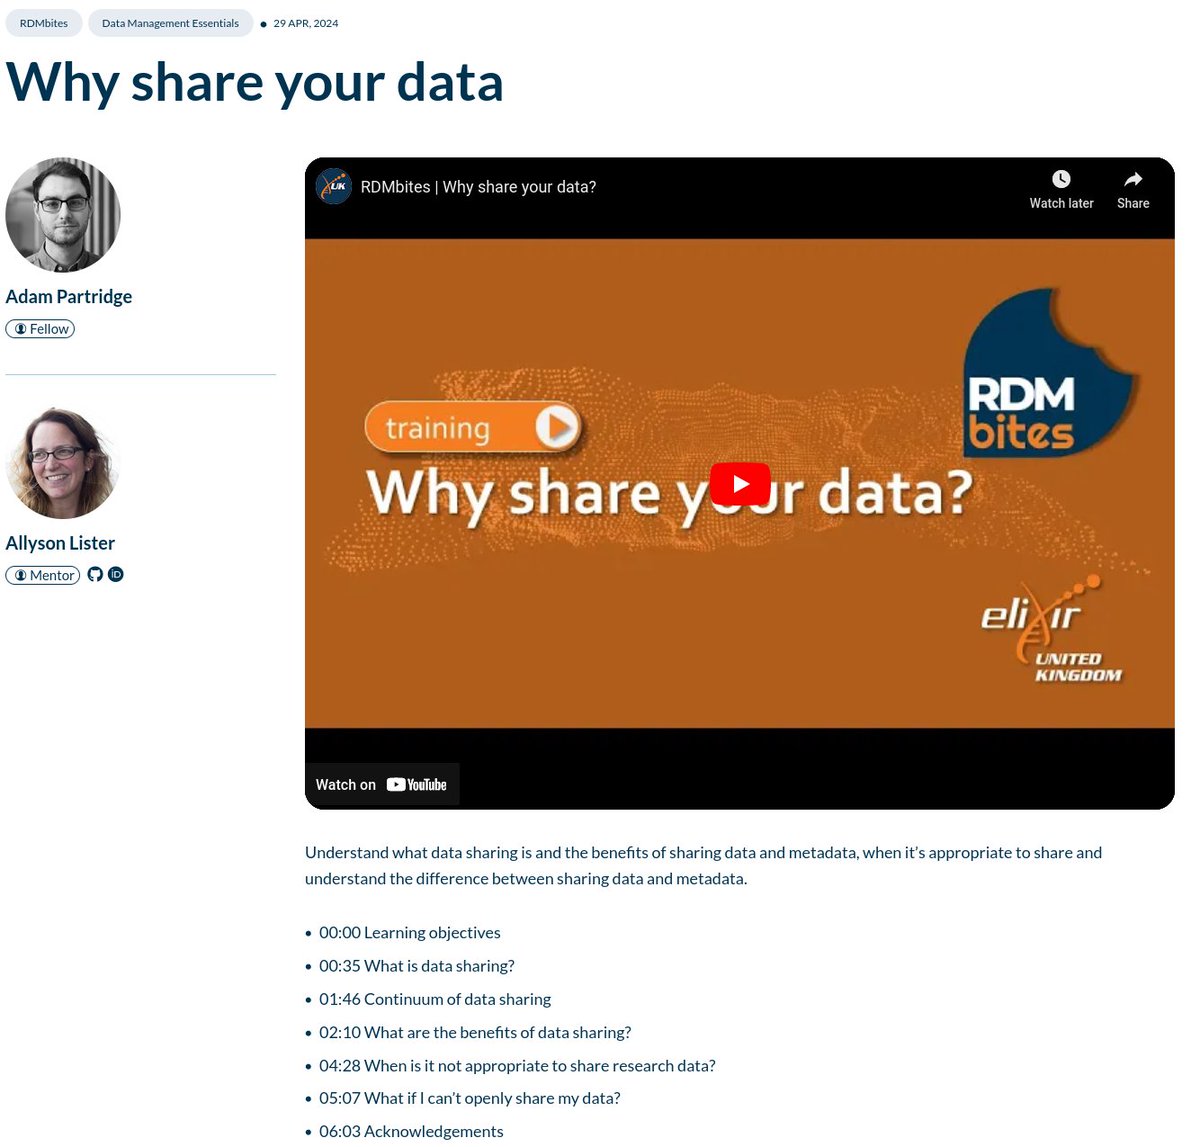 Are you wishing you had a short video explaining why #DataSharing is important to researchers? Look no further than this @ElixirNodeUk #RDMbite by DASH Fellow @dampartridge at fellowship.elixiruknode.org/latest/rdmbite… @sheffielduni #RDM #ResearchData Quick enough to watch it with your cuppa 🫖